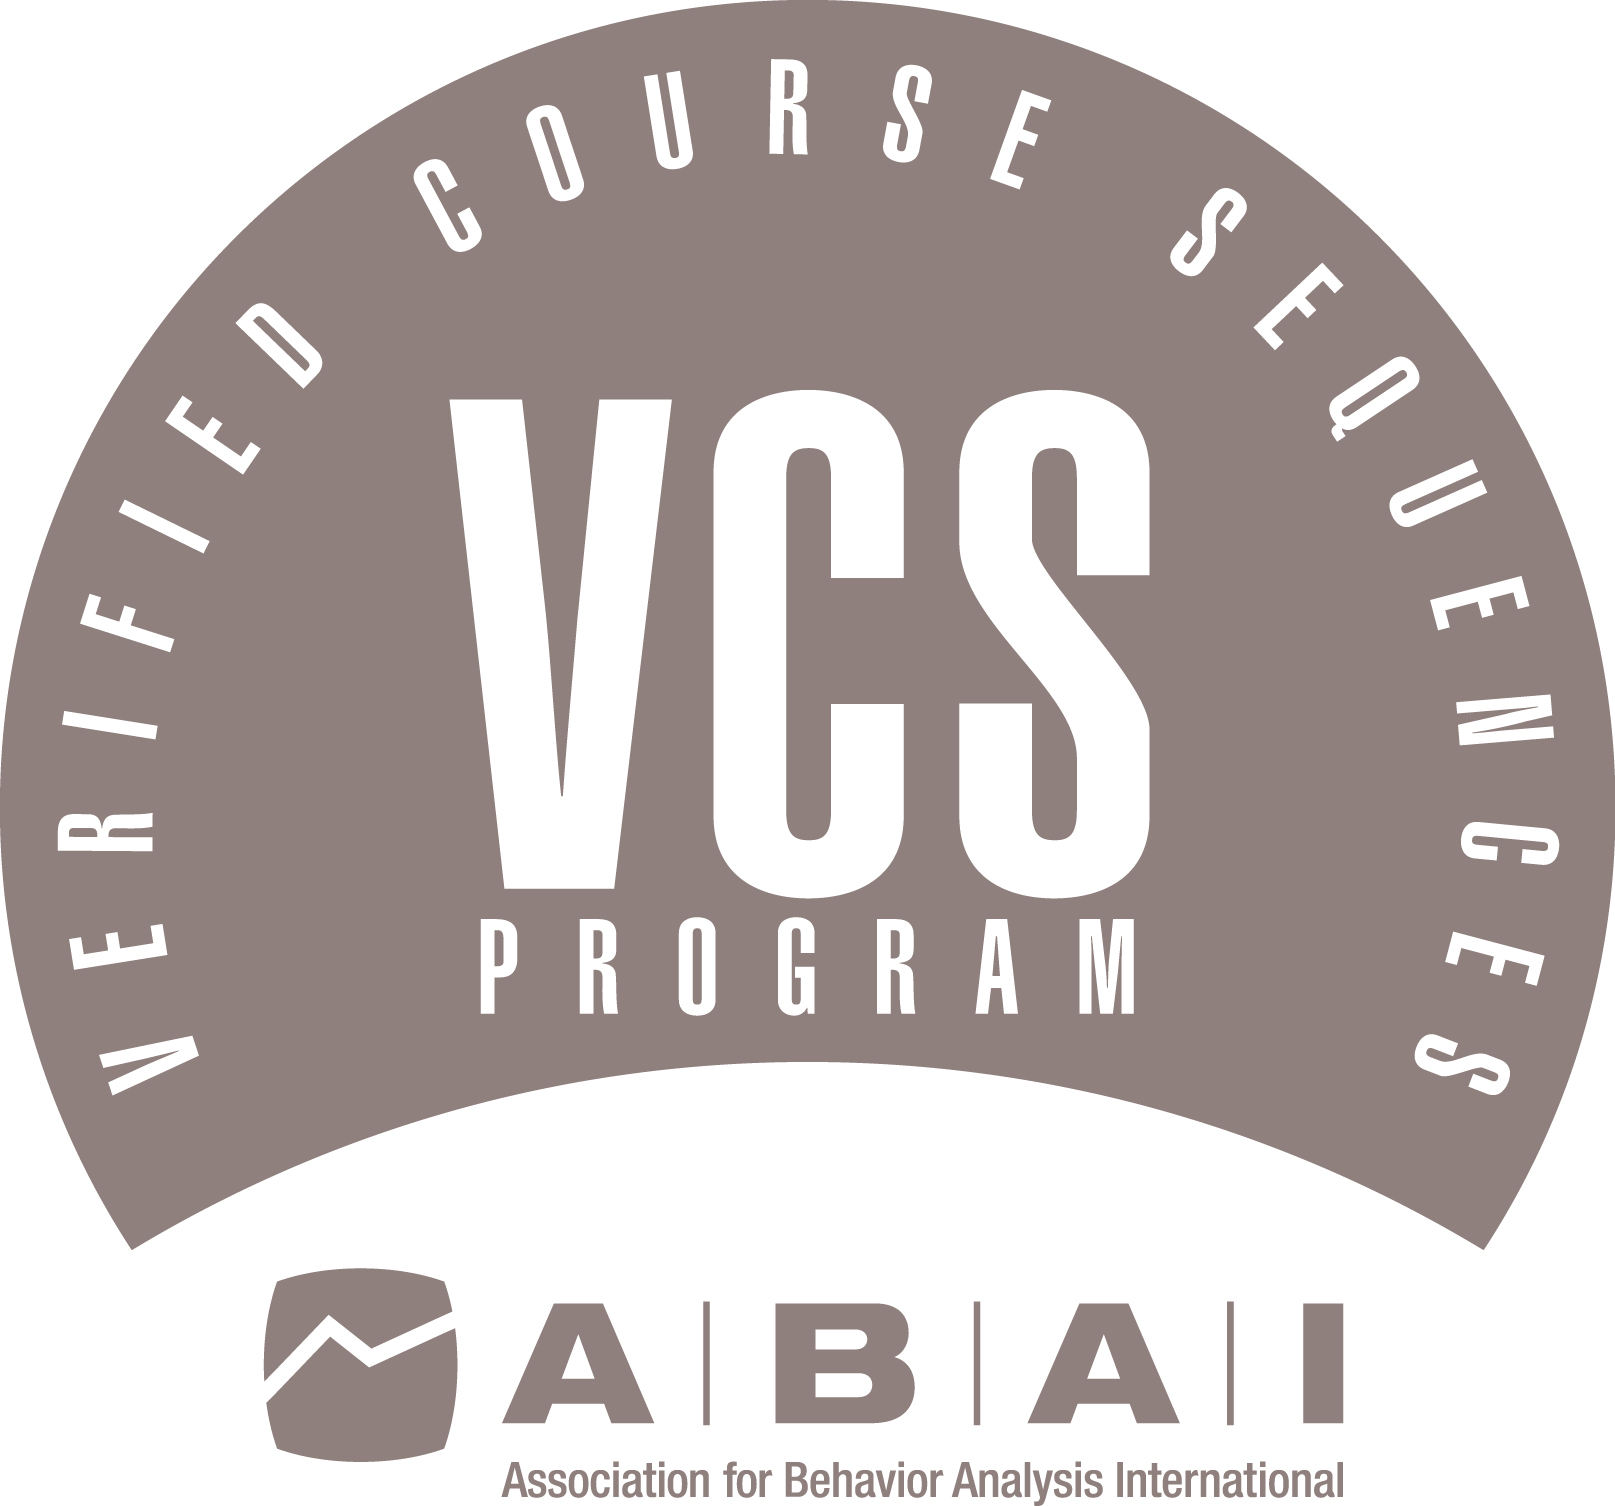 This course sequence is verified by ABAI